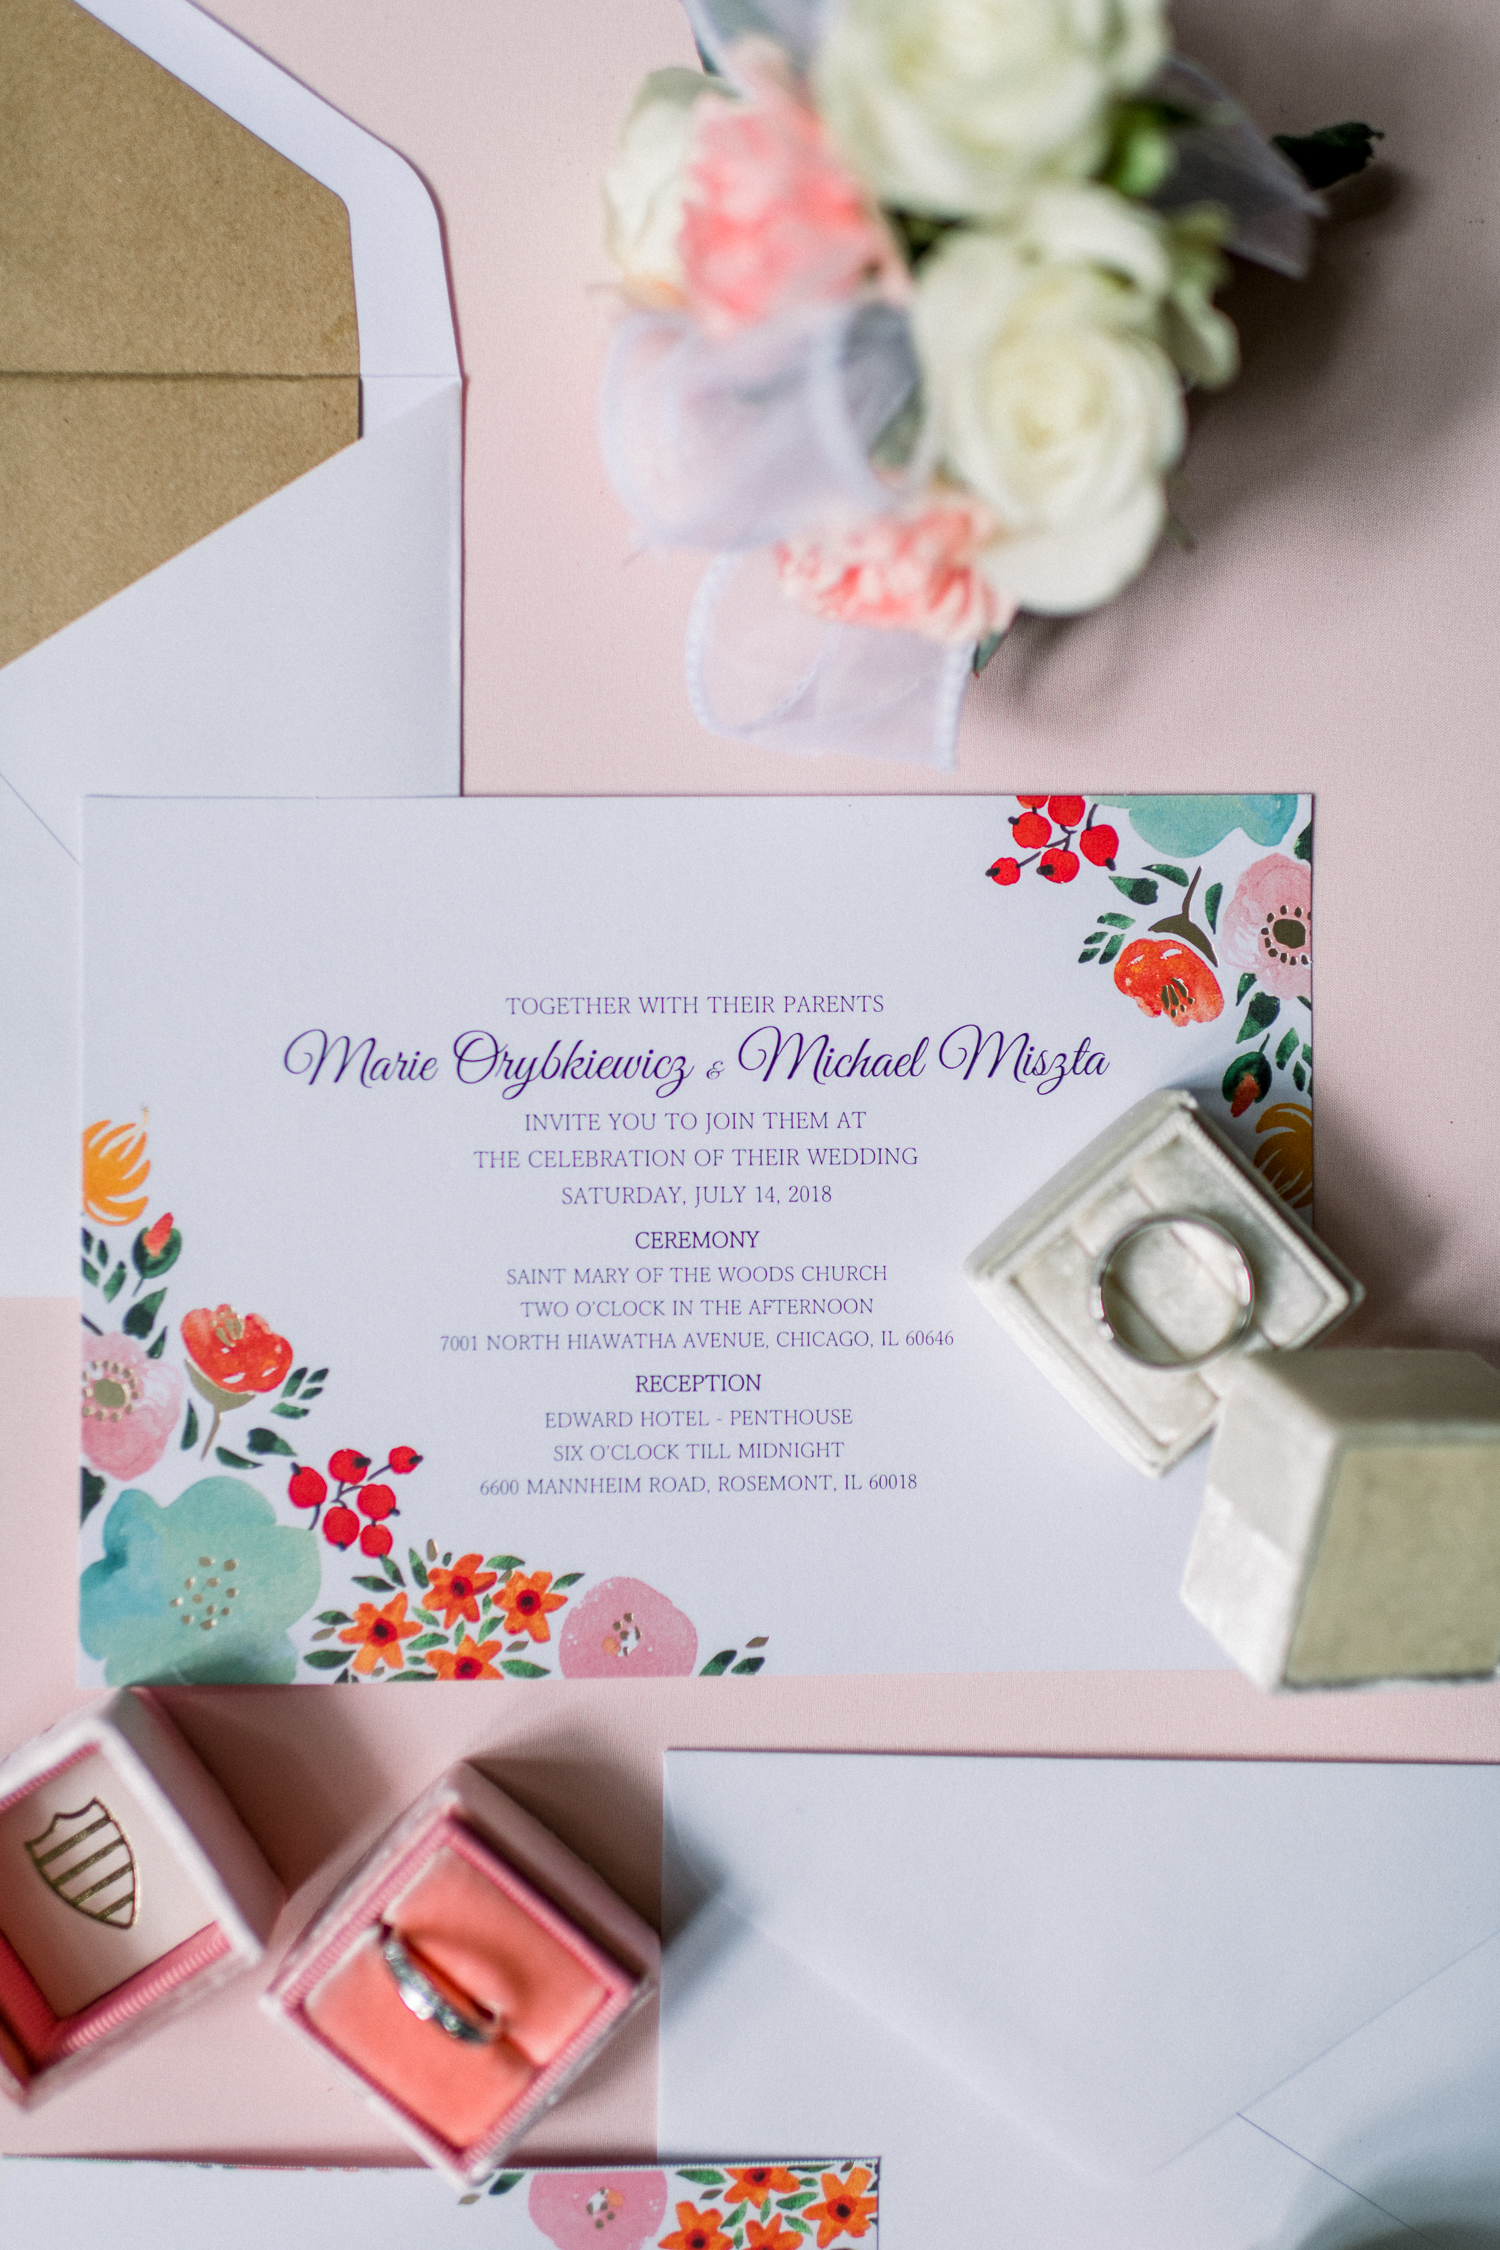 Pink and white wedding invitations with the wedding ring on top